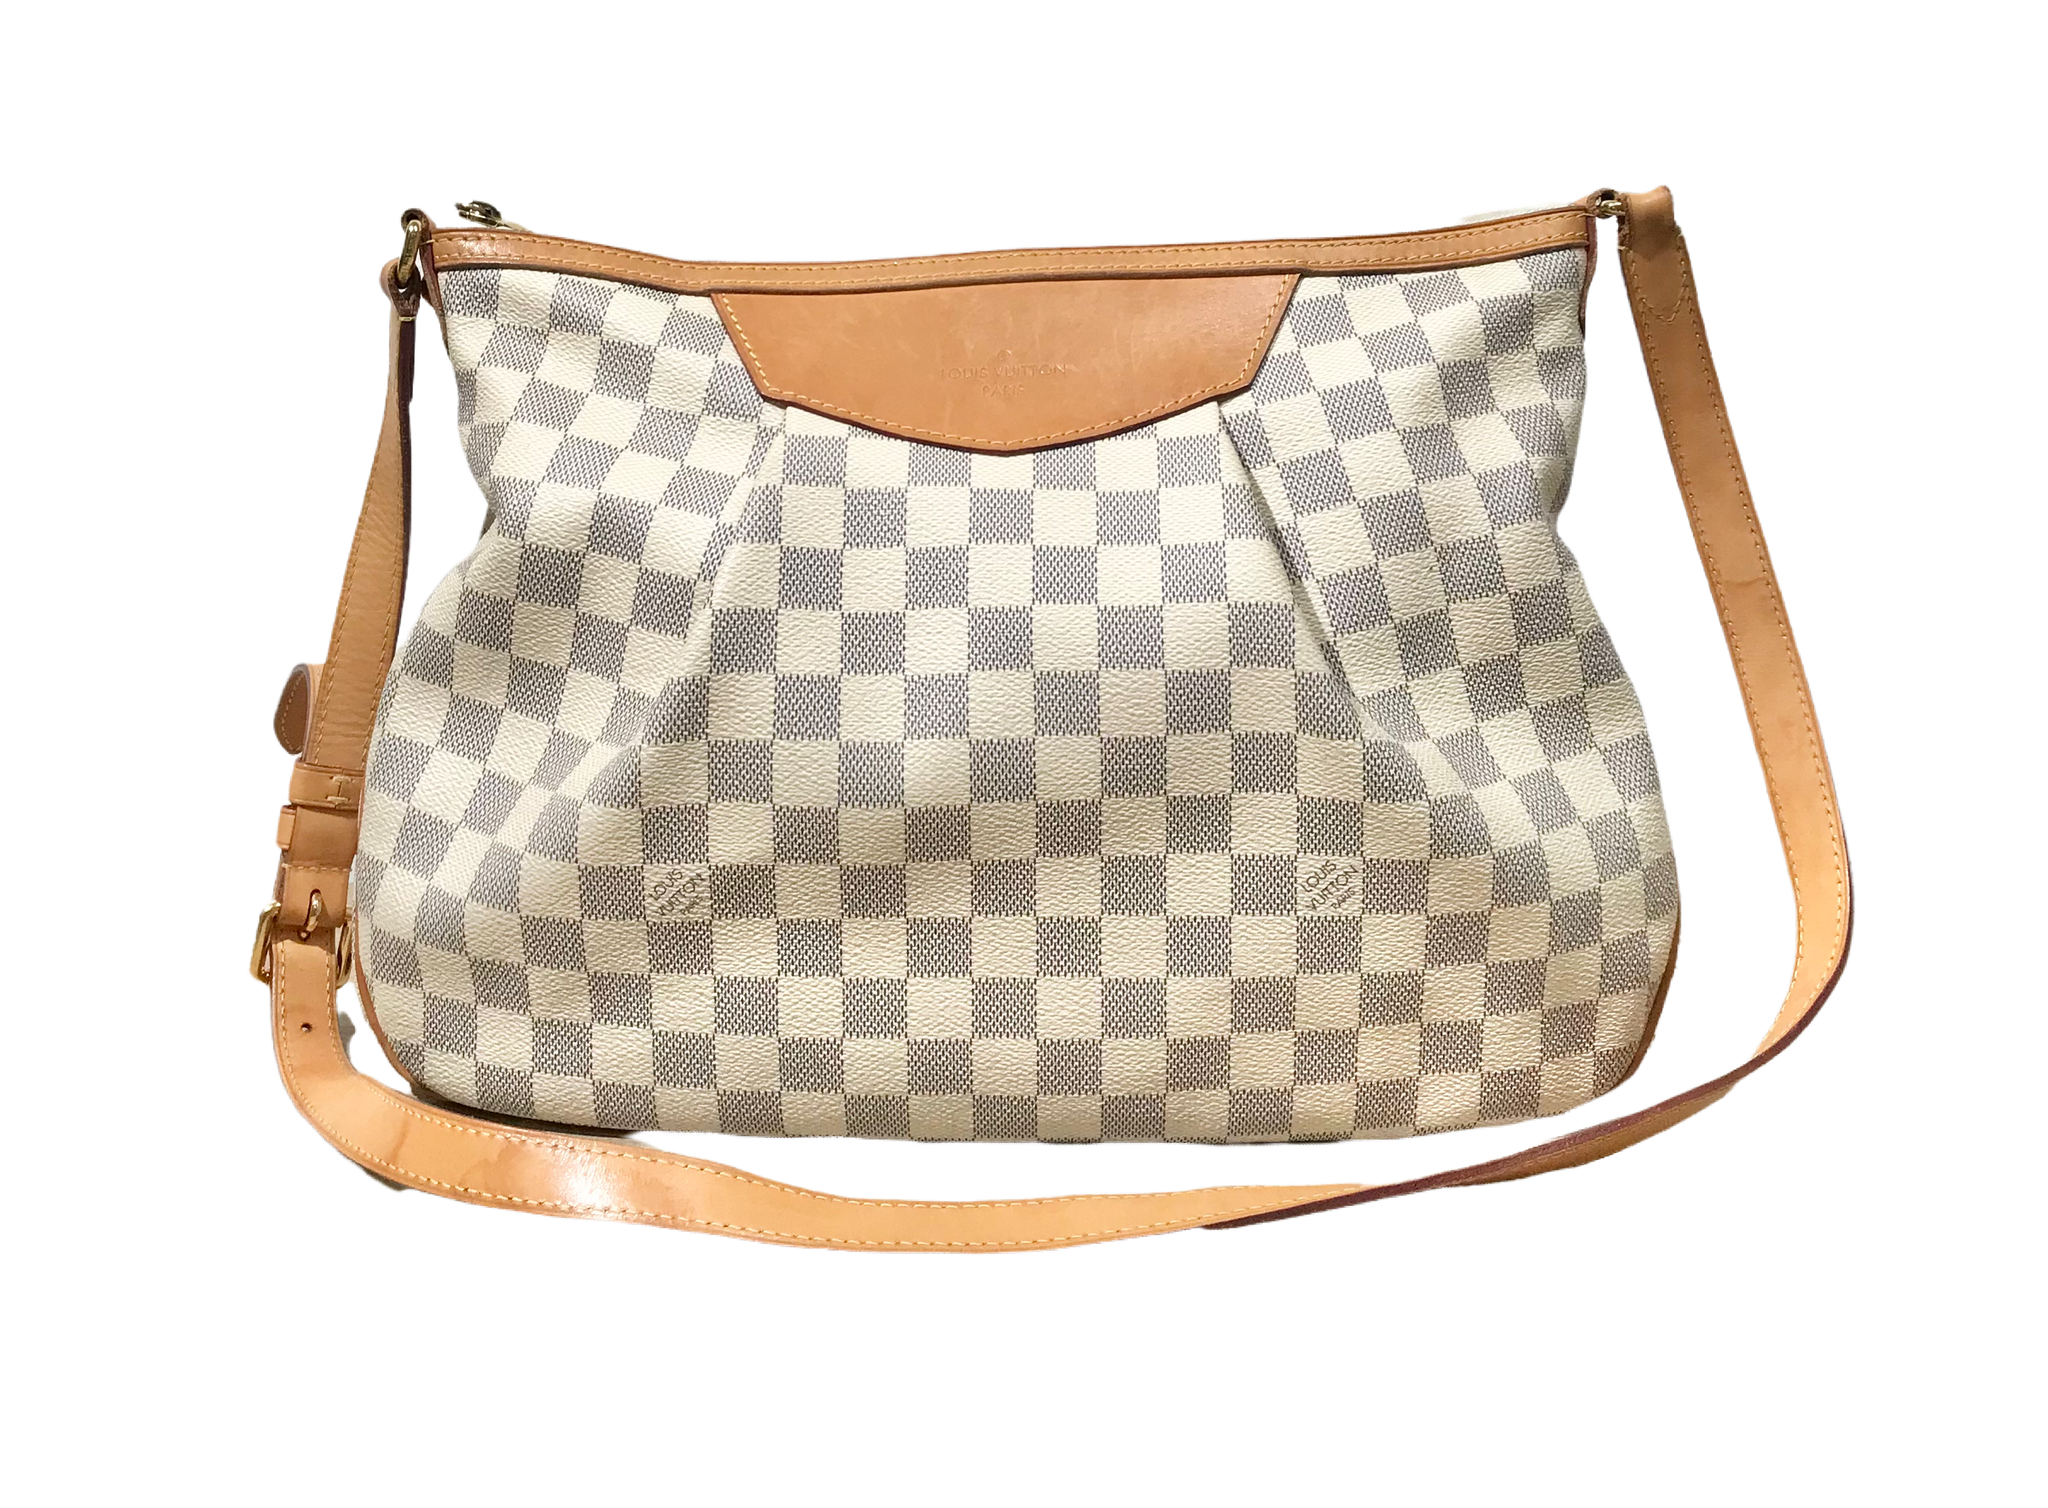 Authenticated Used Louis Vuitton Shoulder Bag Damier Azur Siracusa